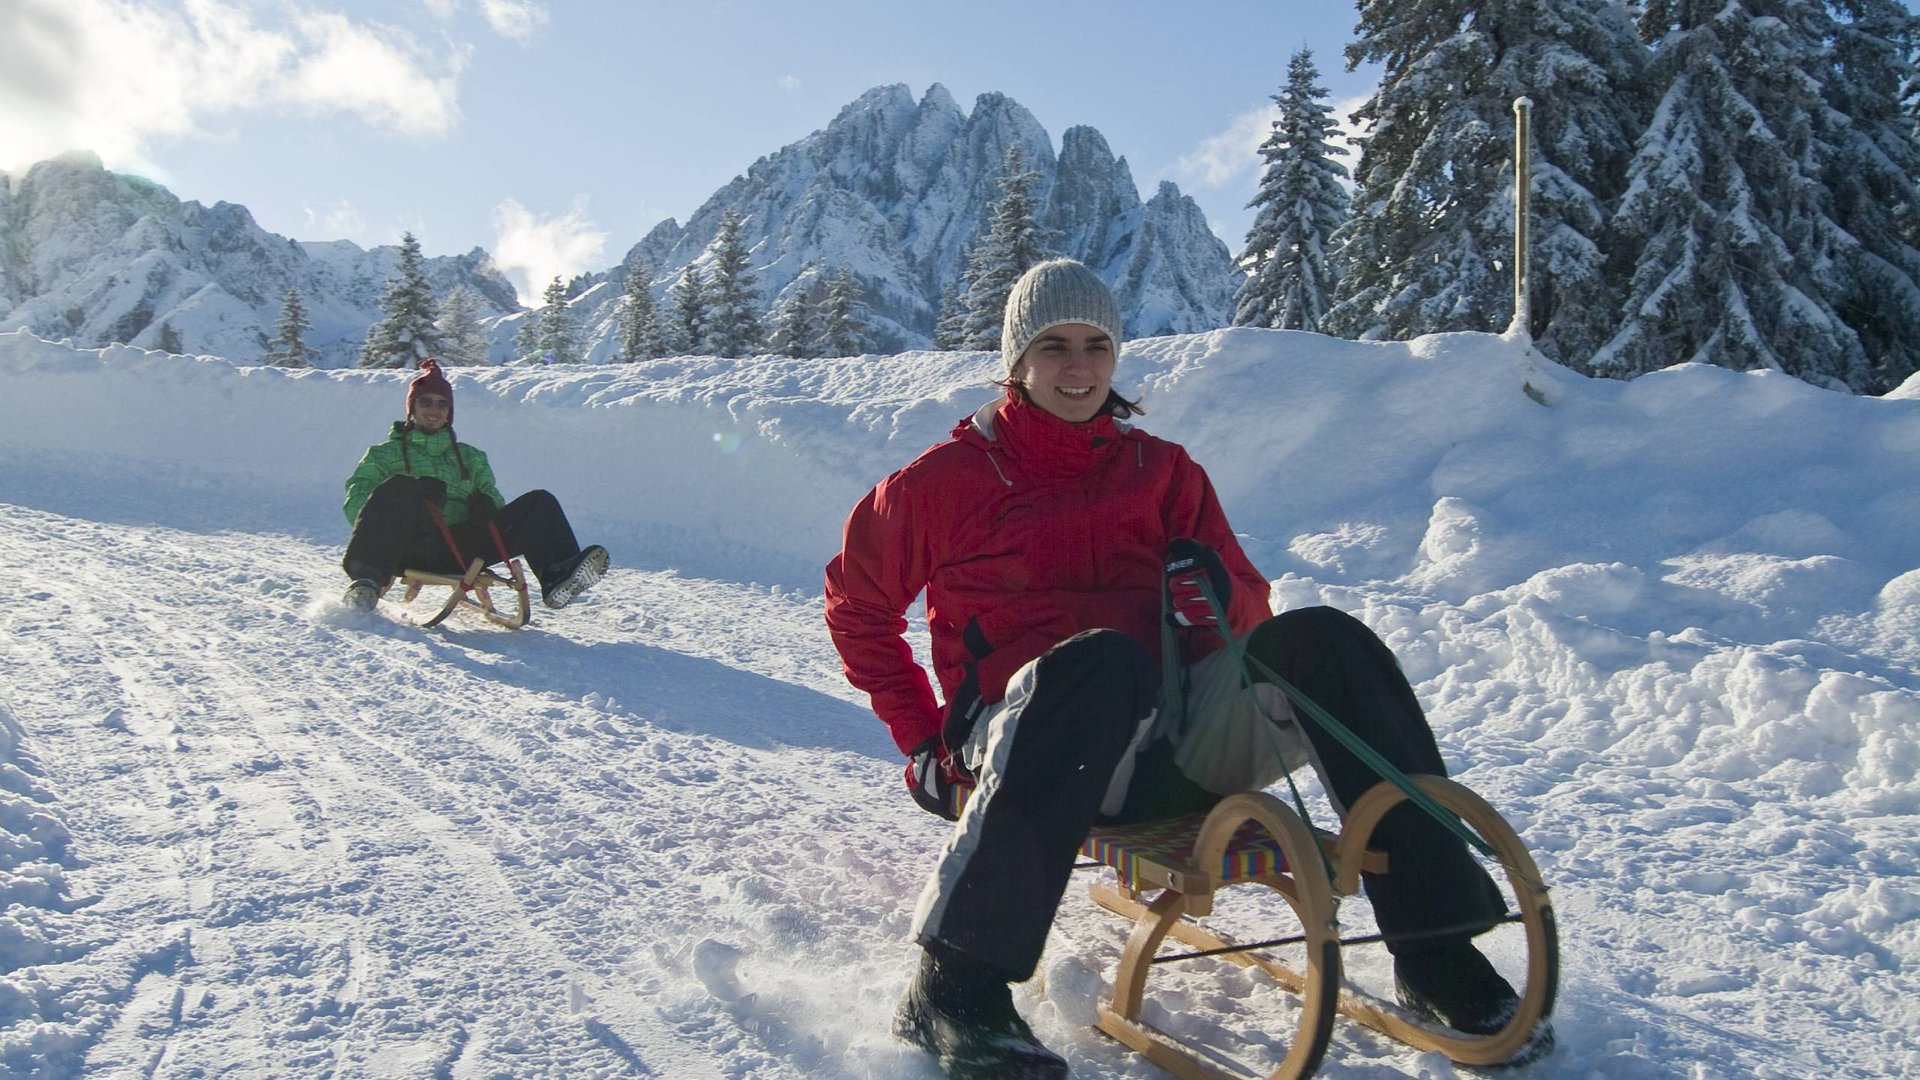 Tobogganing in Tyrol – fun for the whole family